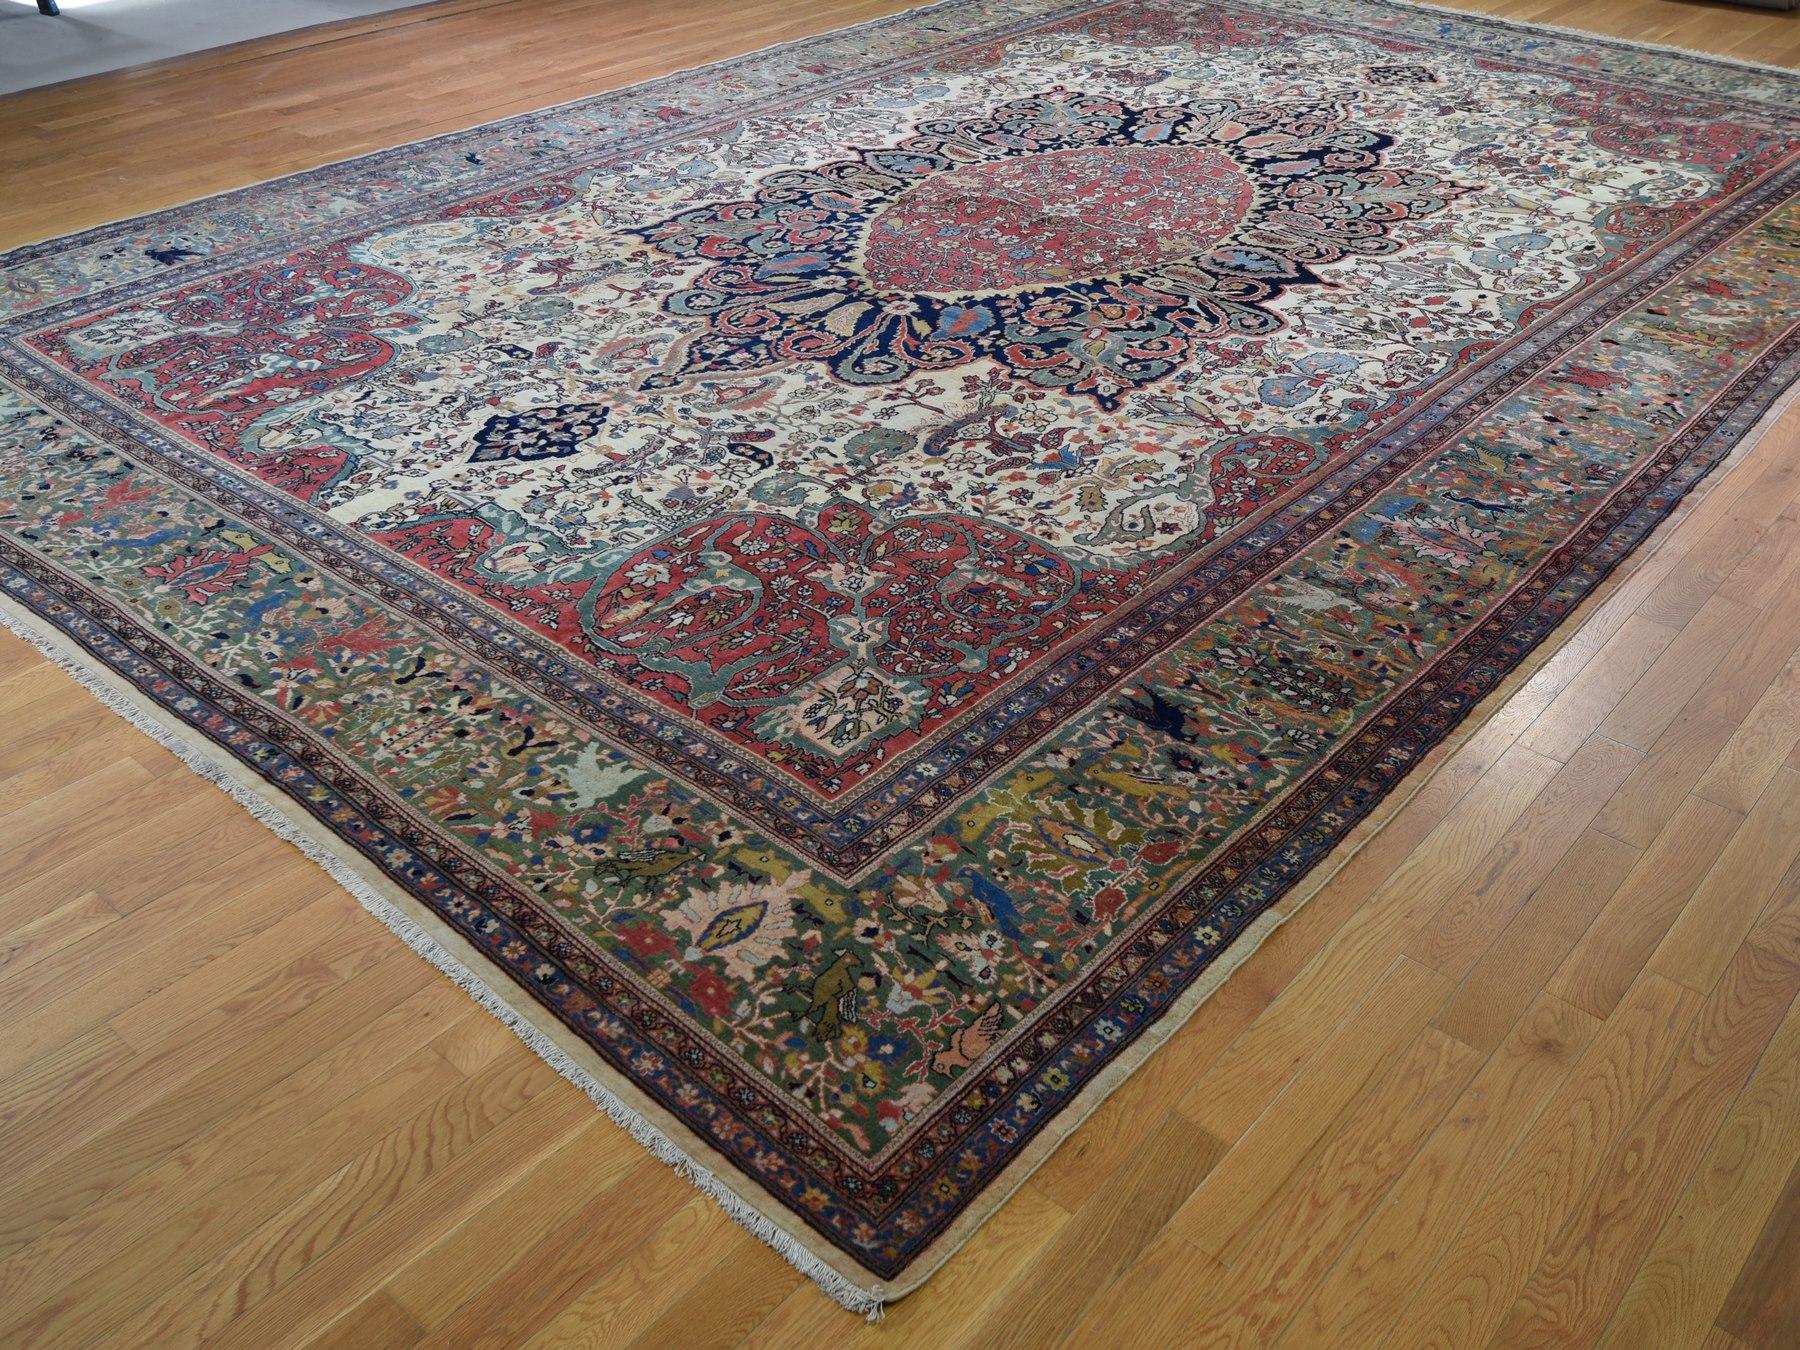 Hand-Knotted Oversized Antique Persian Sarouk Fereghan with Birds Full Pile and Soft Rug For Sale